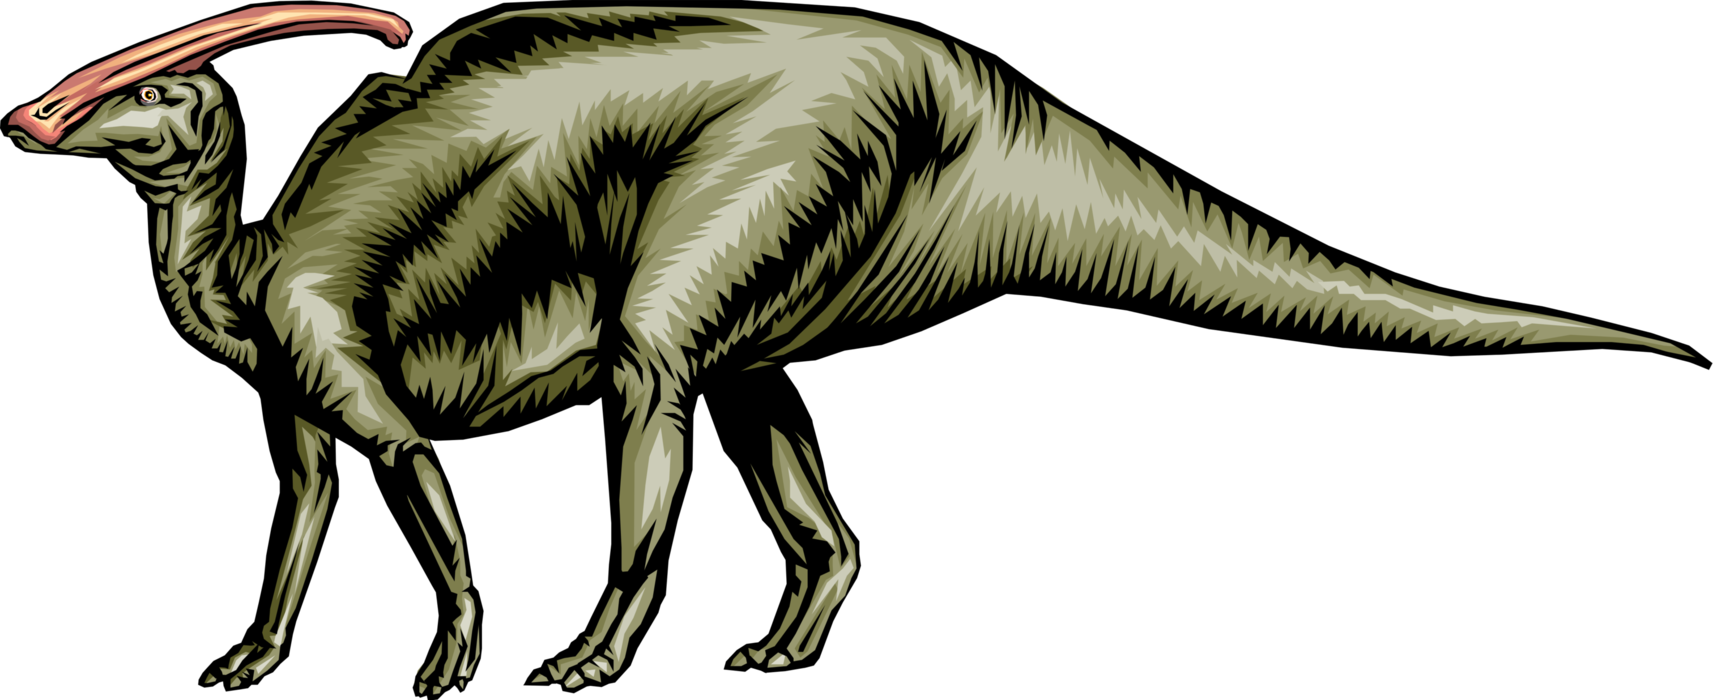 Vector Illustration of Prehistoric Duck Billed Dinosaur from Jurassic and Cretaceous Periods